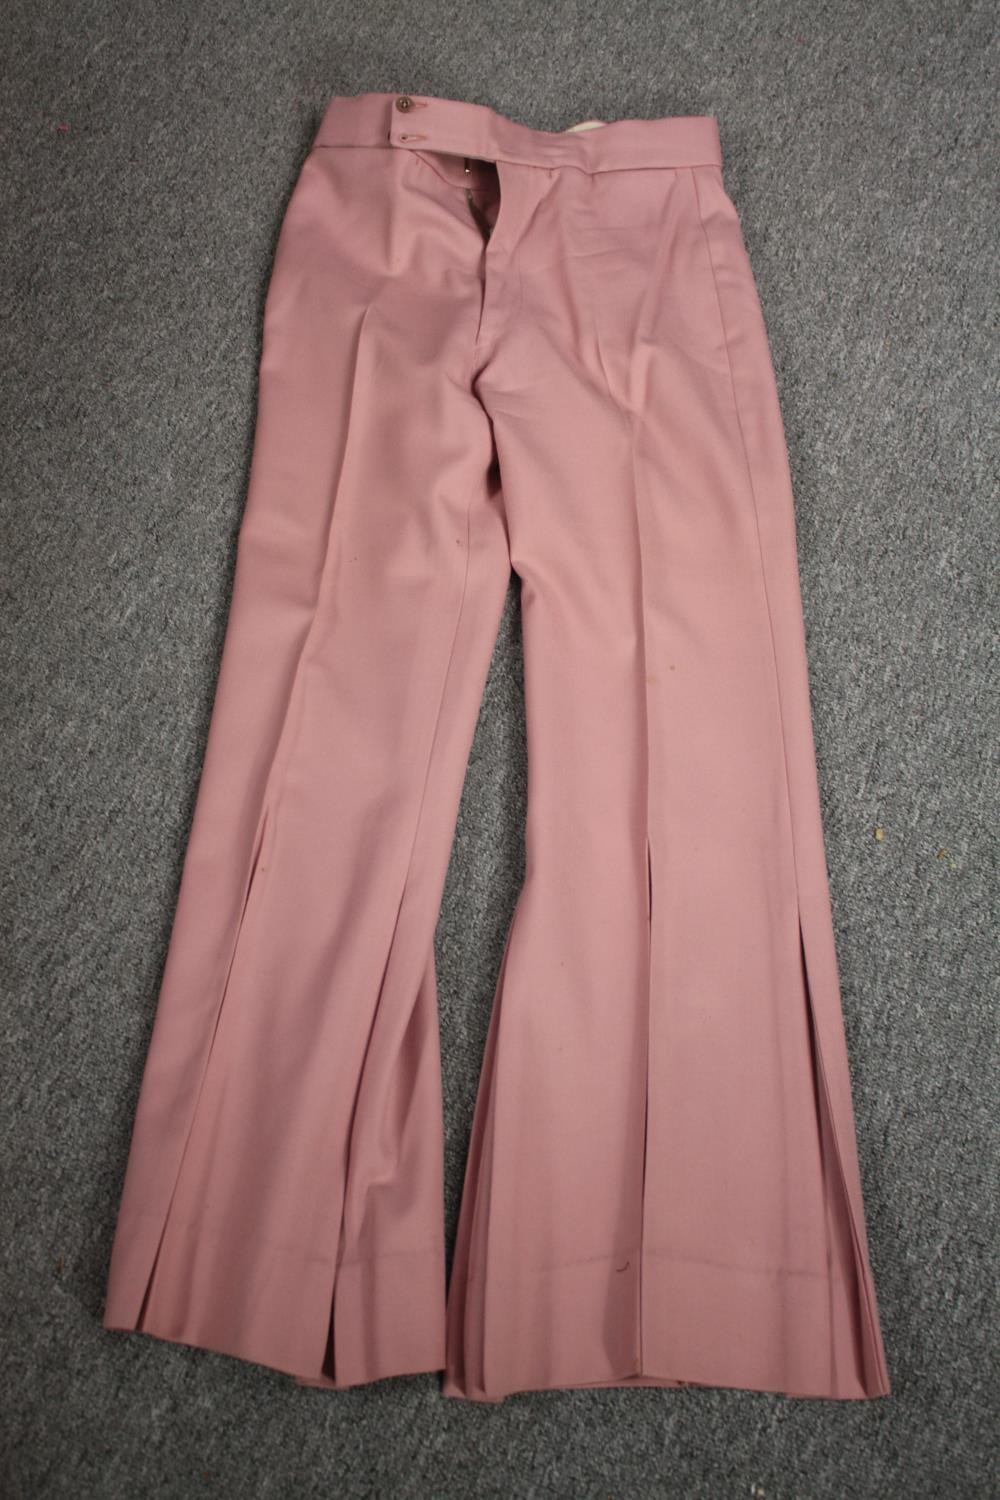 A vintage bespoke made pink silk mix suit with flared bottoms. - Image 5 of 5